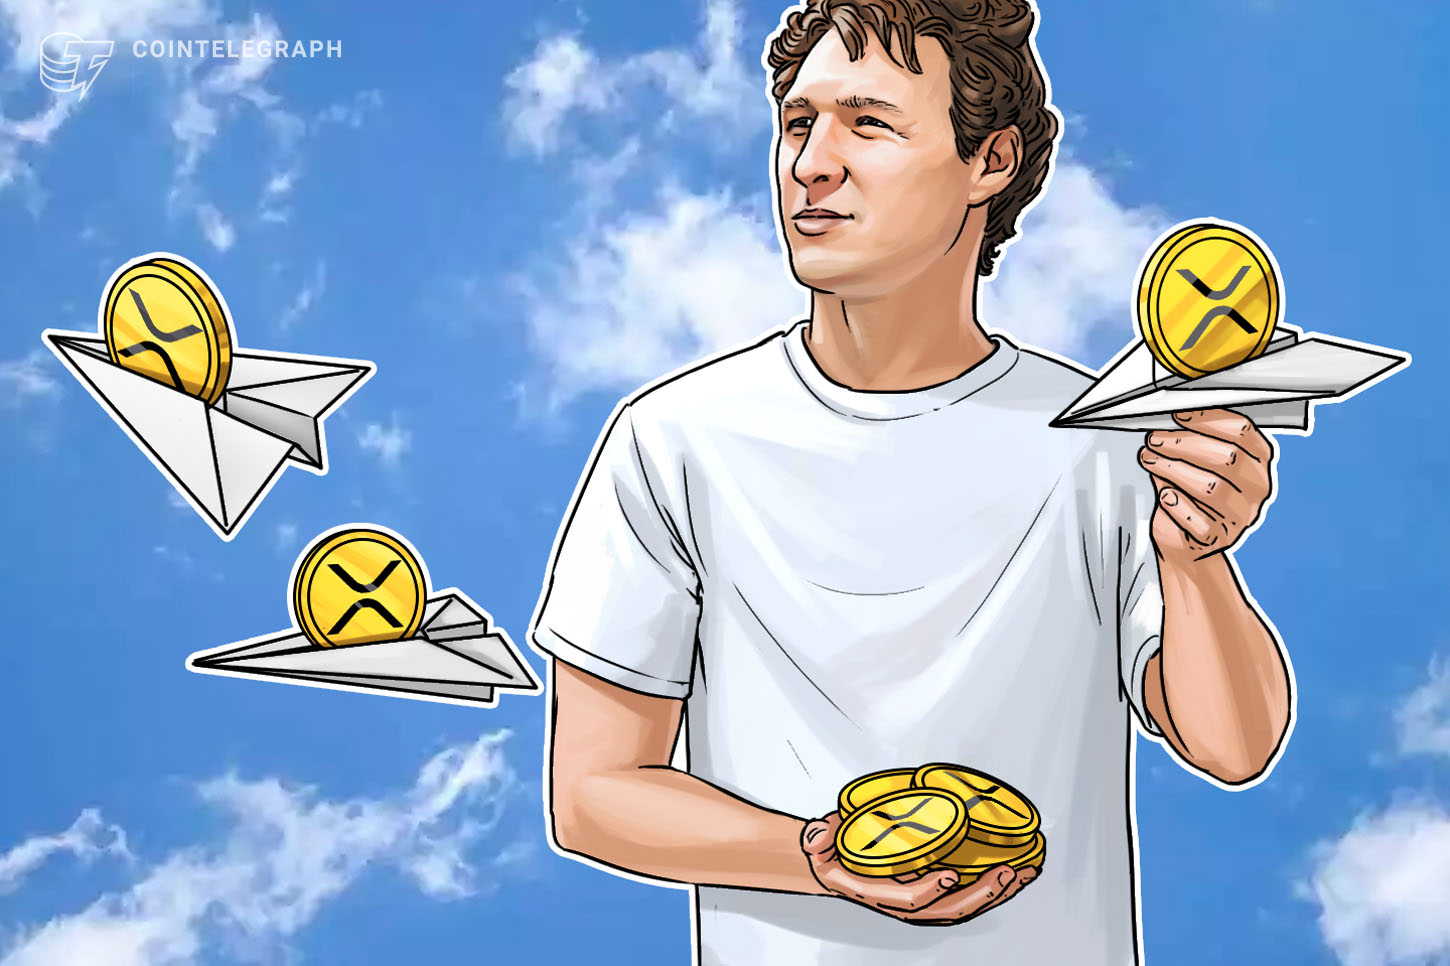 Ripple co-founder Jed McCaleb bought $400 million value of XRP in 2020